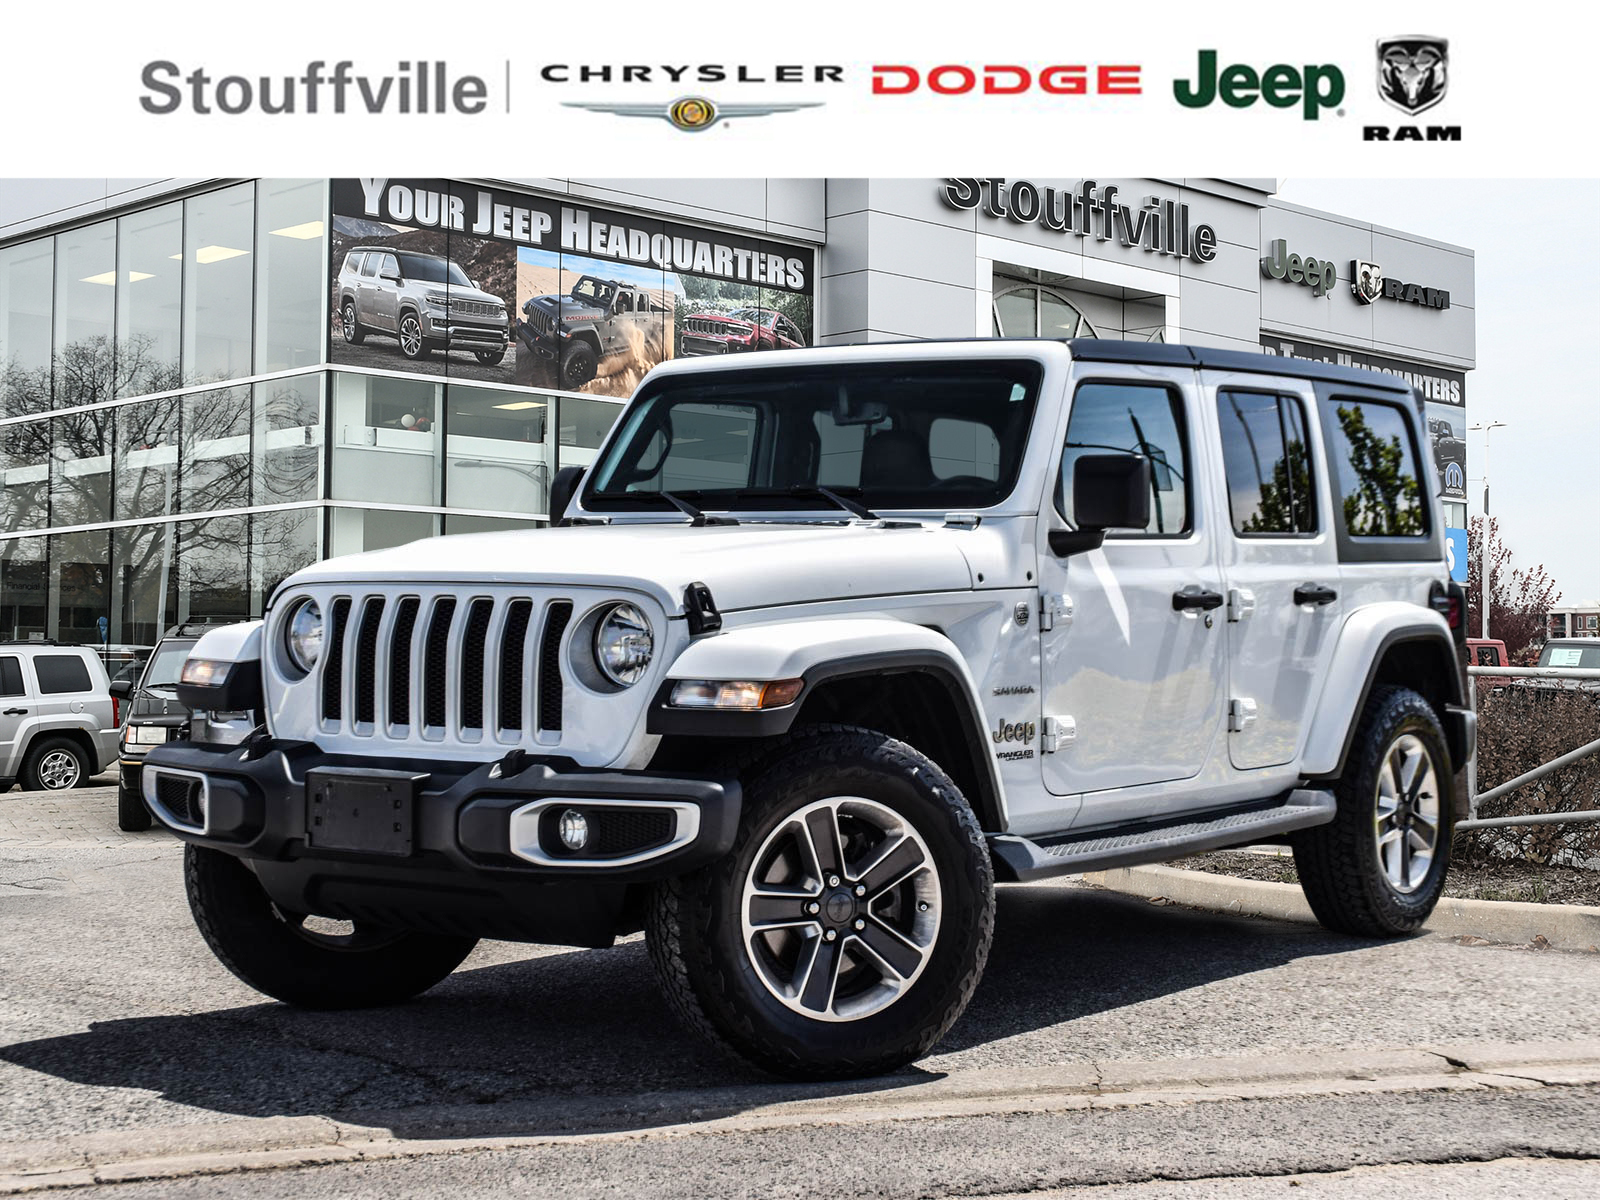 2019 Jeep WRANGLER UNLIMITED Sahara 4x4 - WHITE ON RED LEATHER INTERIOR!